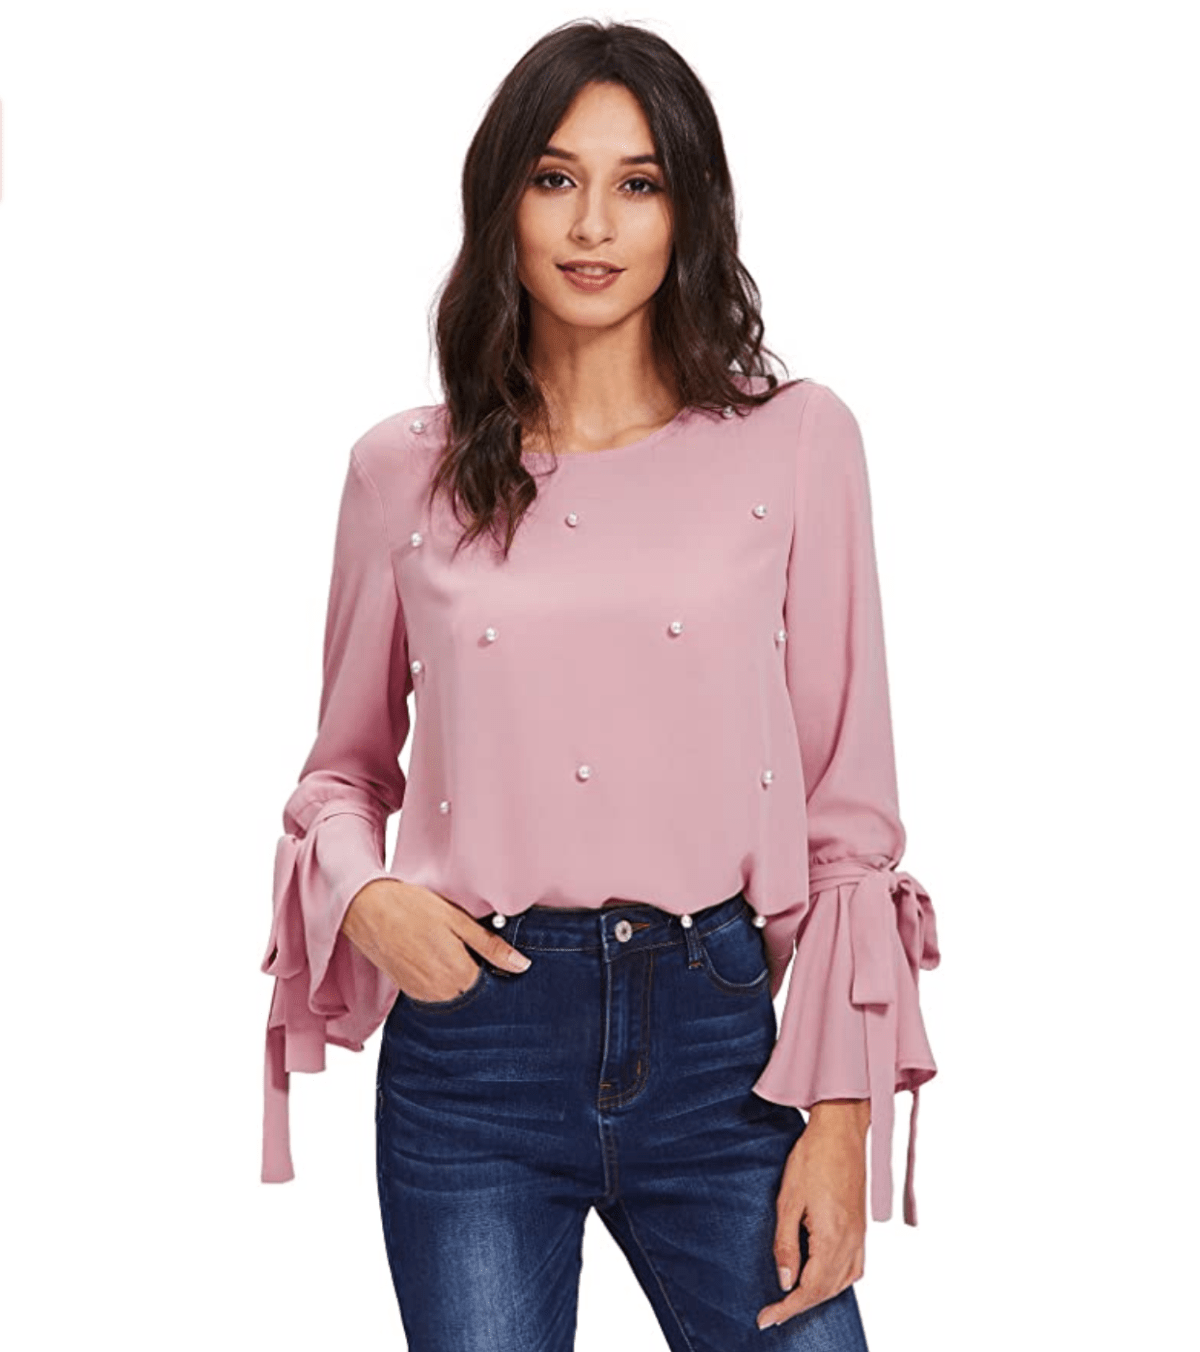 13 Pearl-Embellished Tops That Effortlessly Nail Holiday Style | Us Weekly